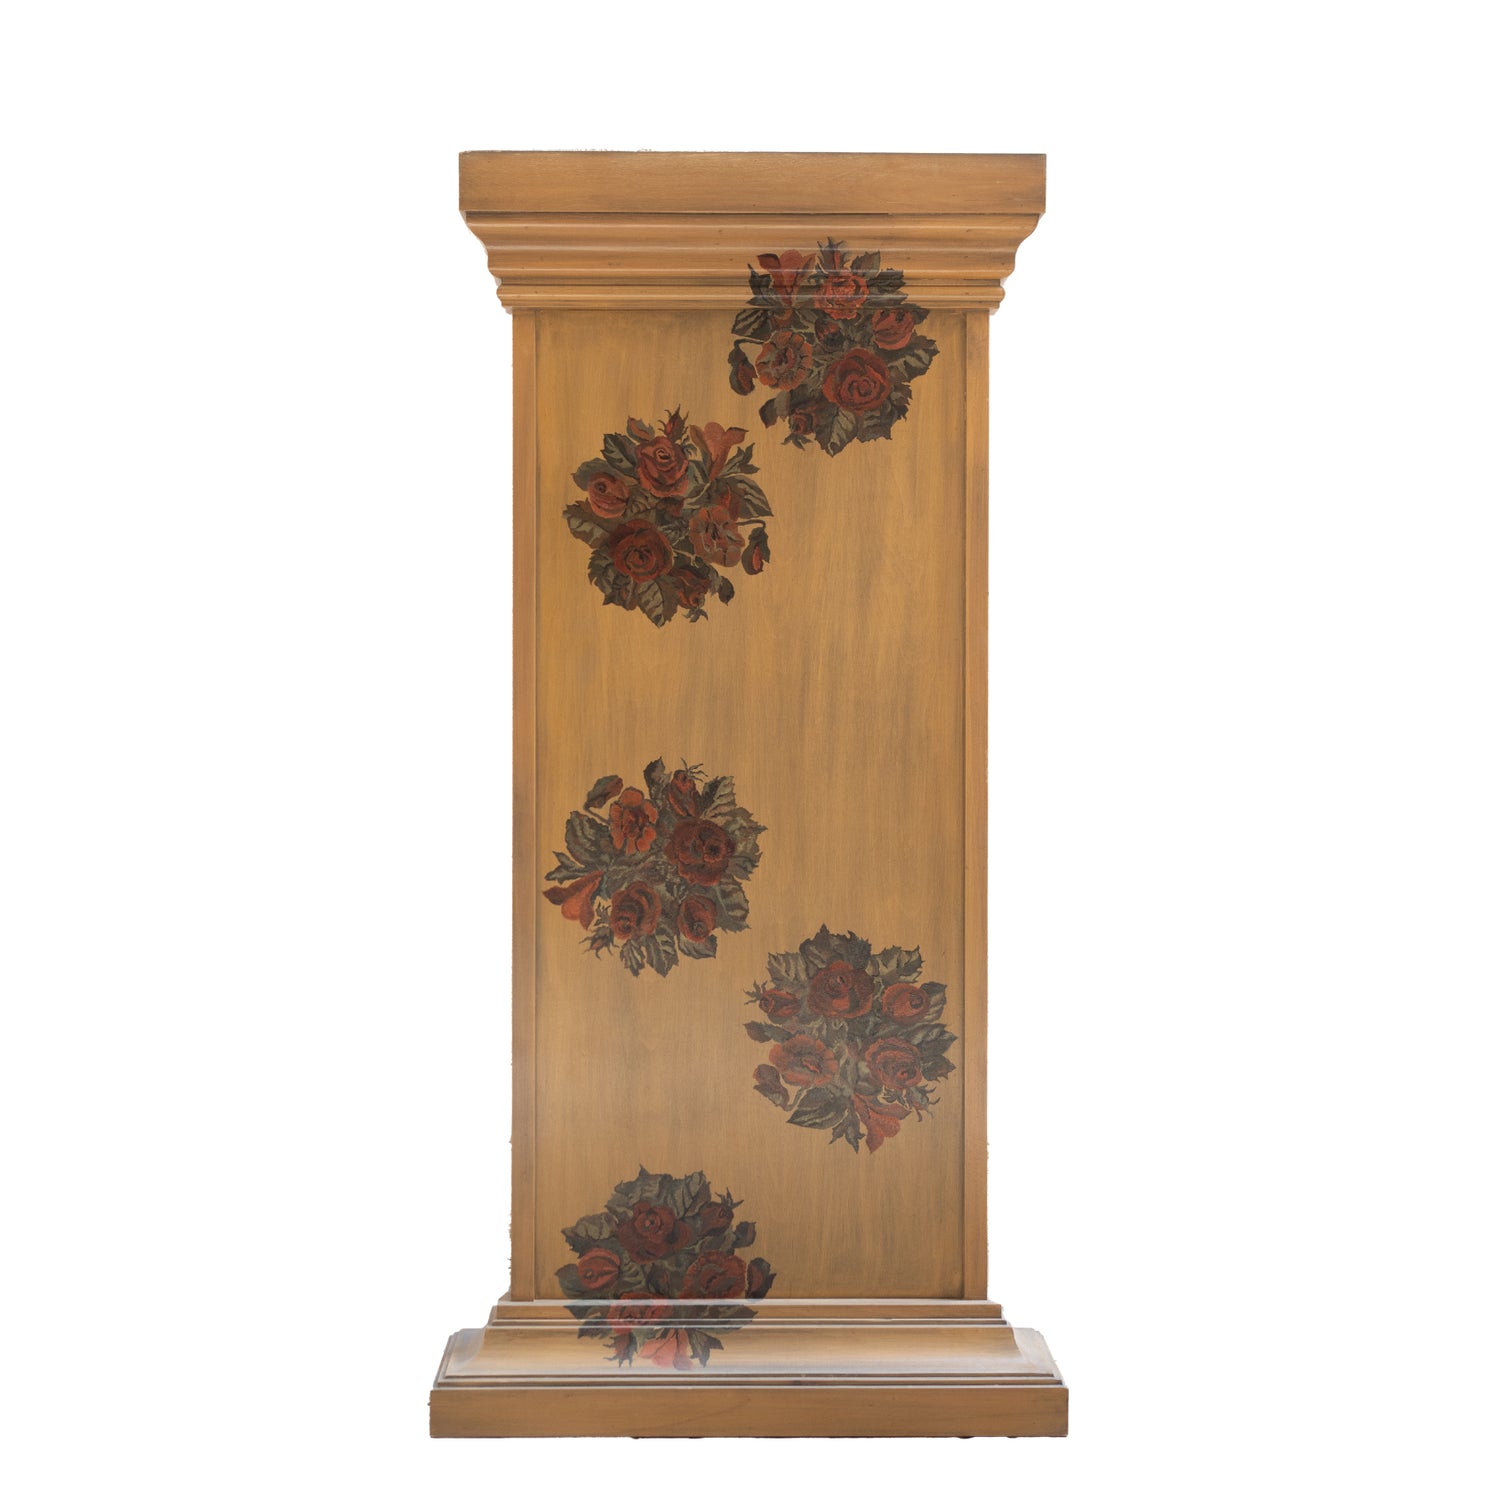 Hand Painted Floral Wooden Divider